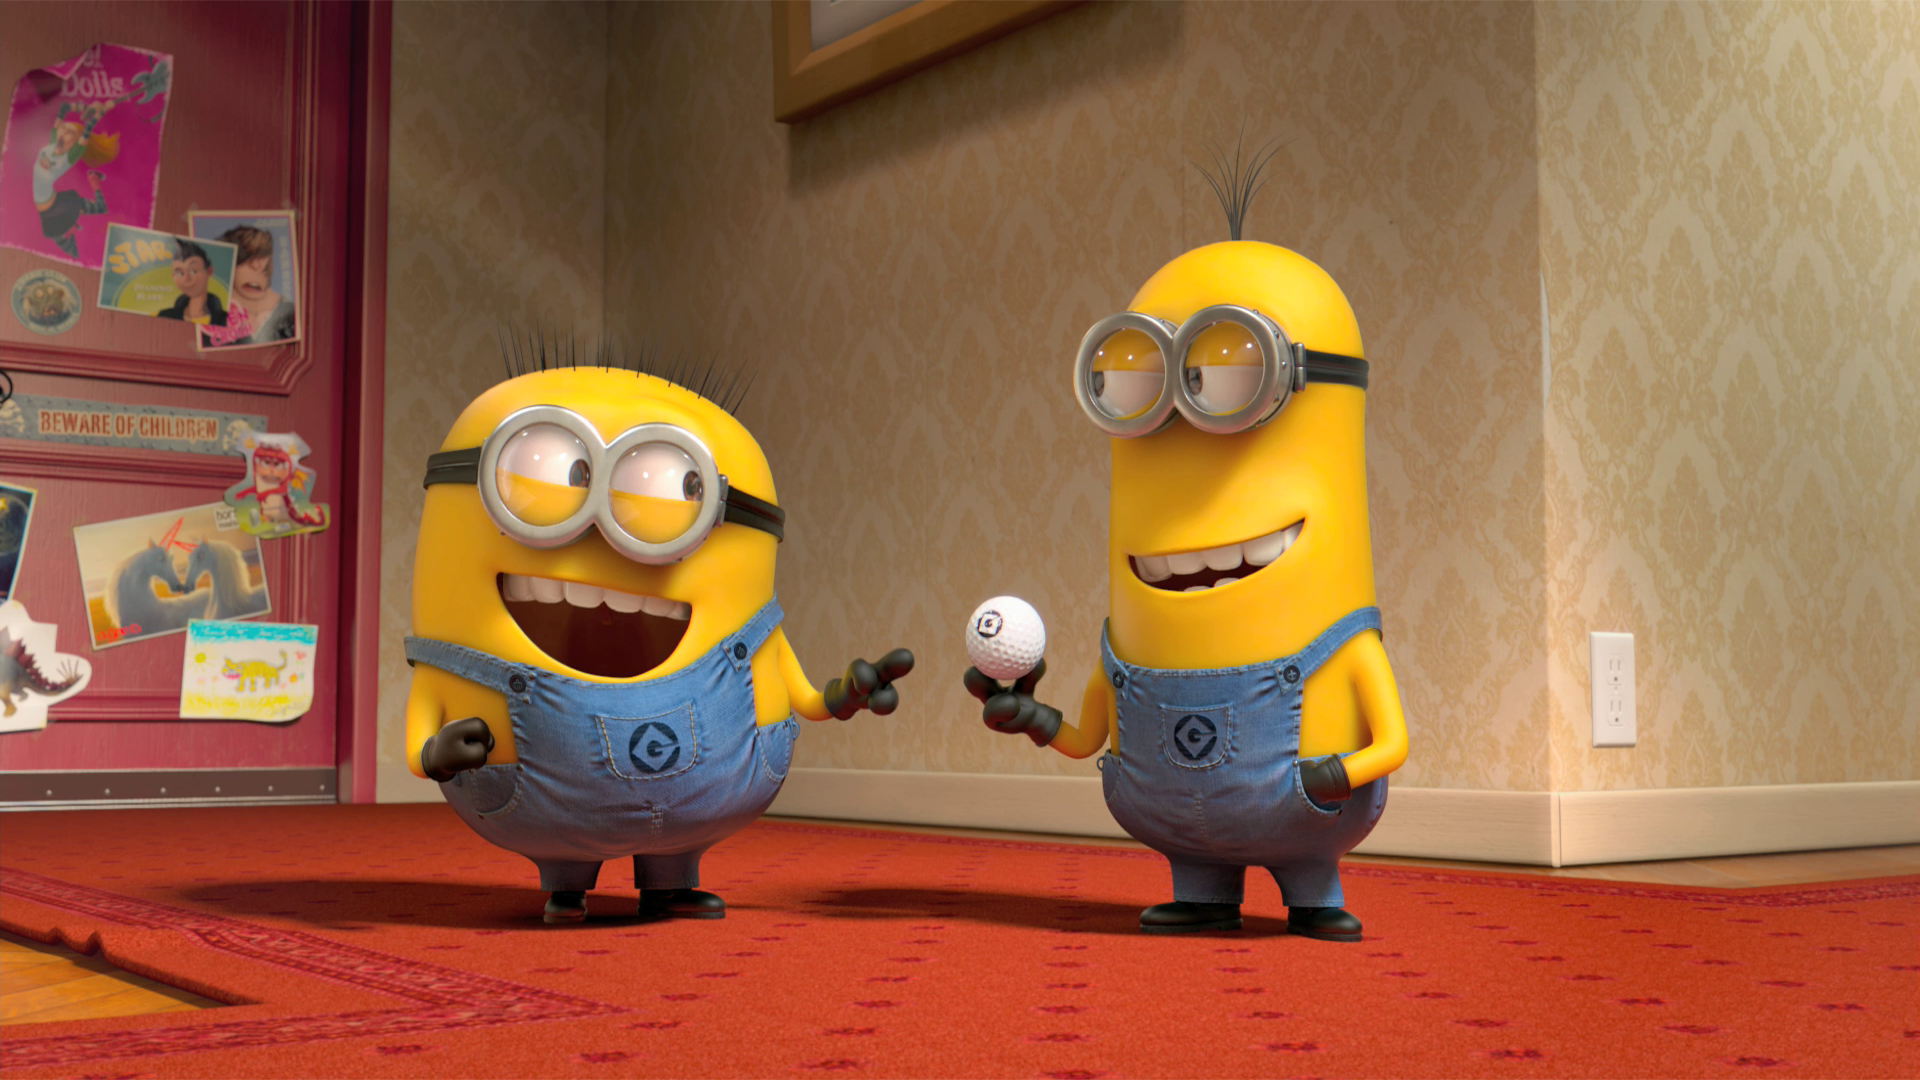 Funny Minion Wallpapers HD free download | Wallpapers, Backgrounds ...